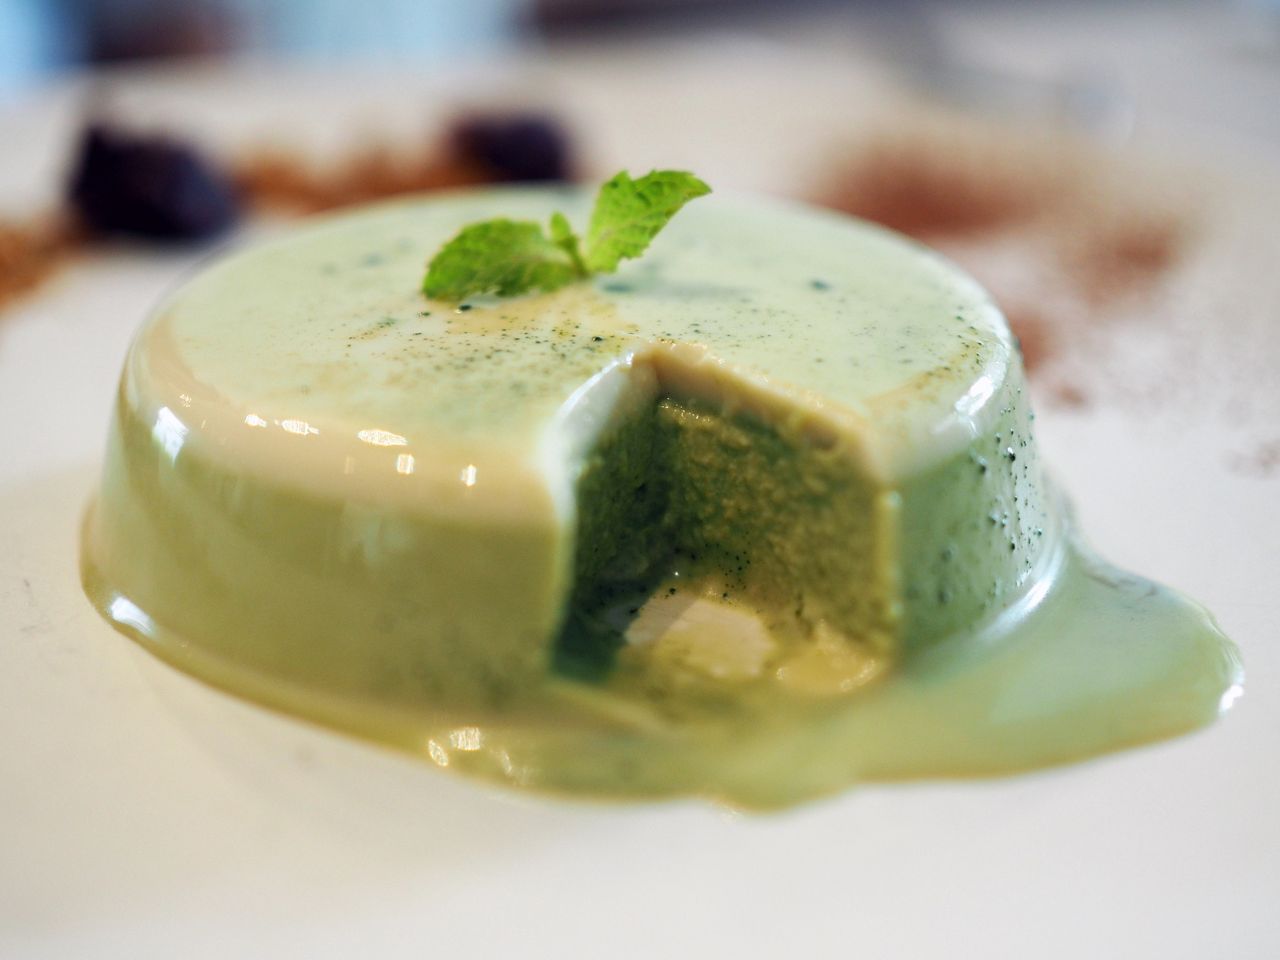 Rediscovering the nutritional prowess and culinary versatility of spinach pudding